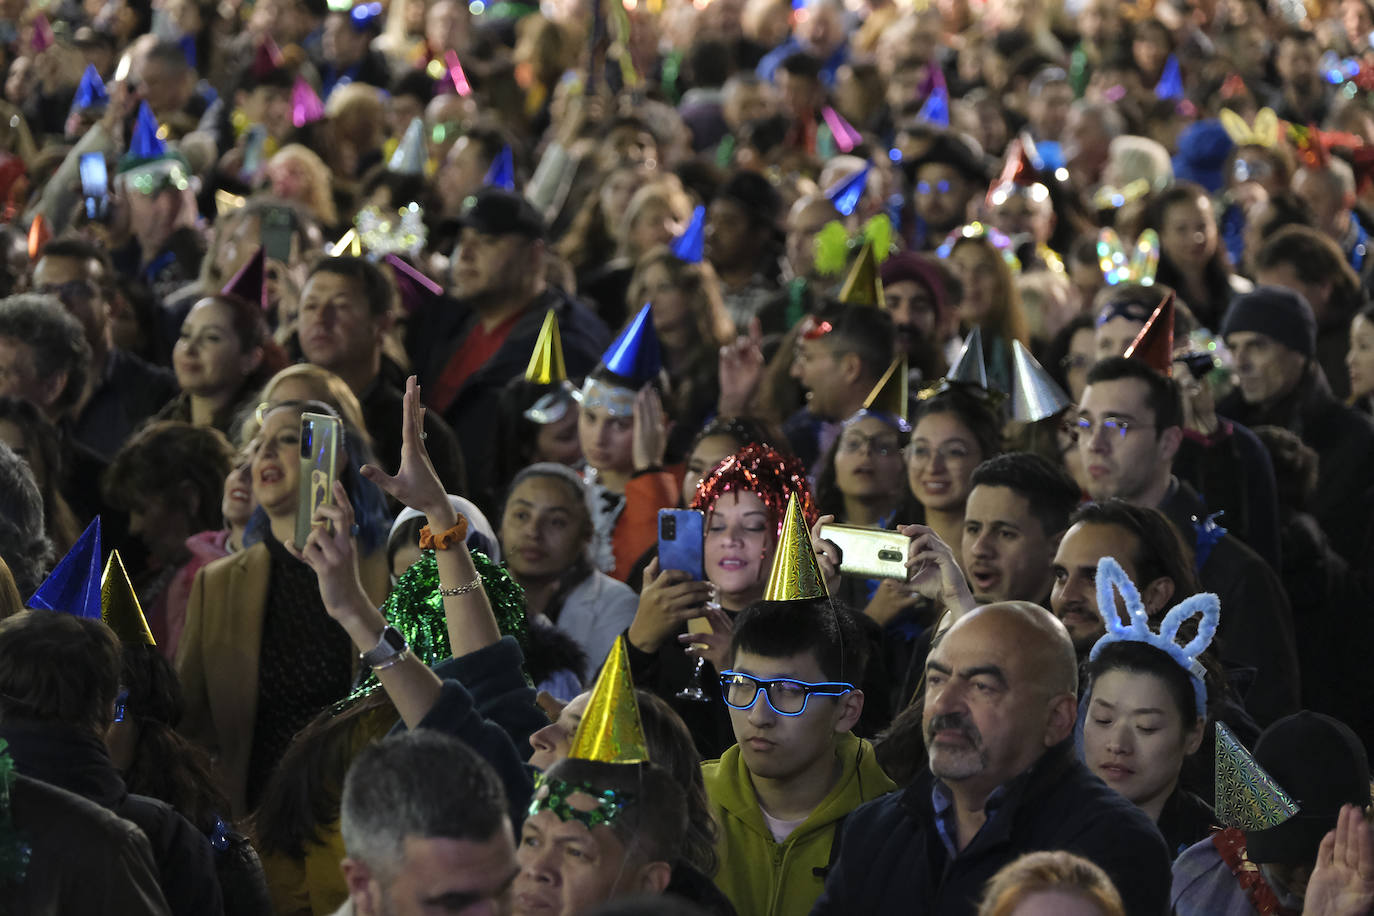 New Year's Eve celebrations in Malaga city attracted visitors from Spain and abroad.